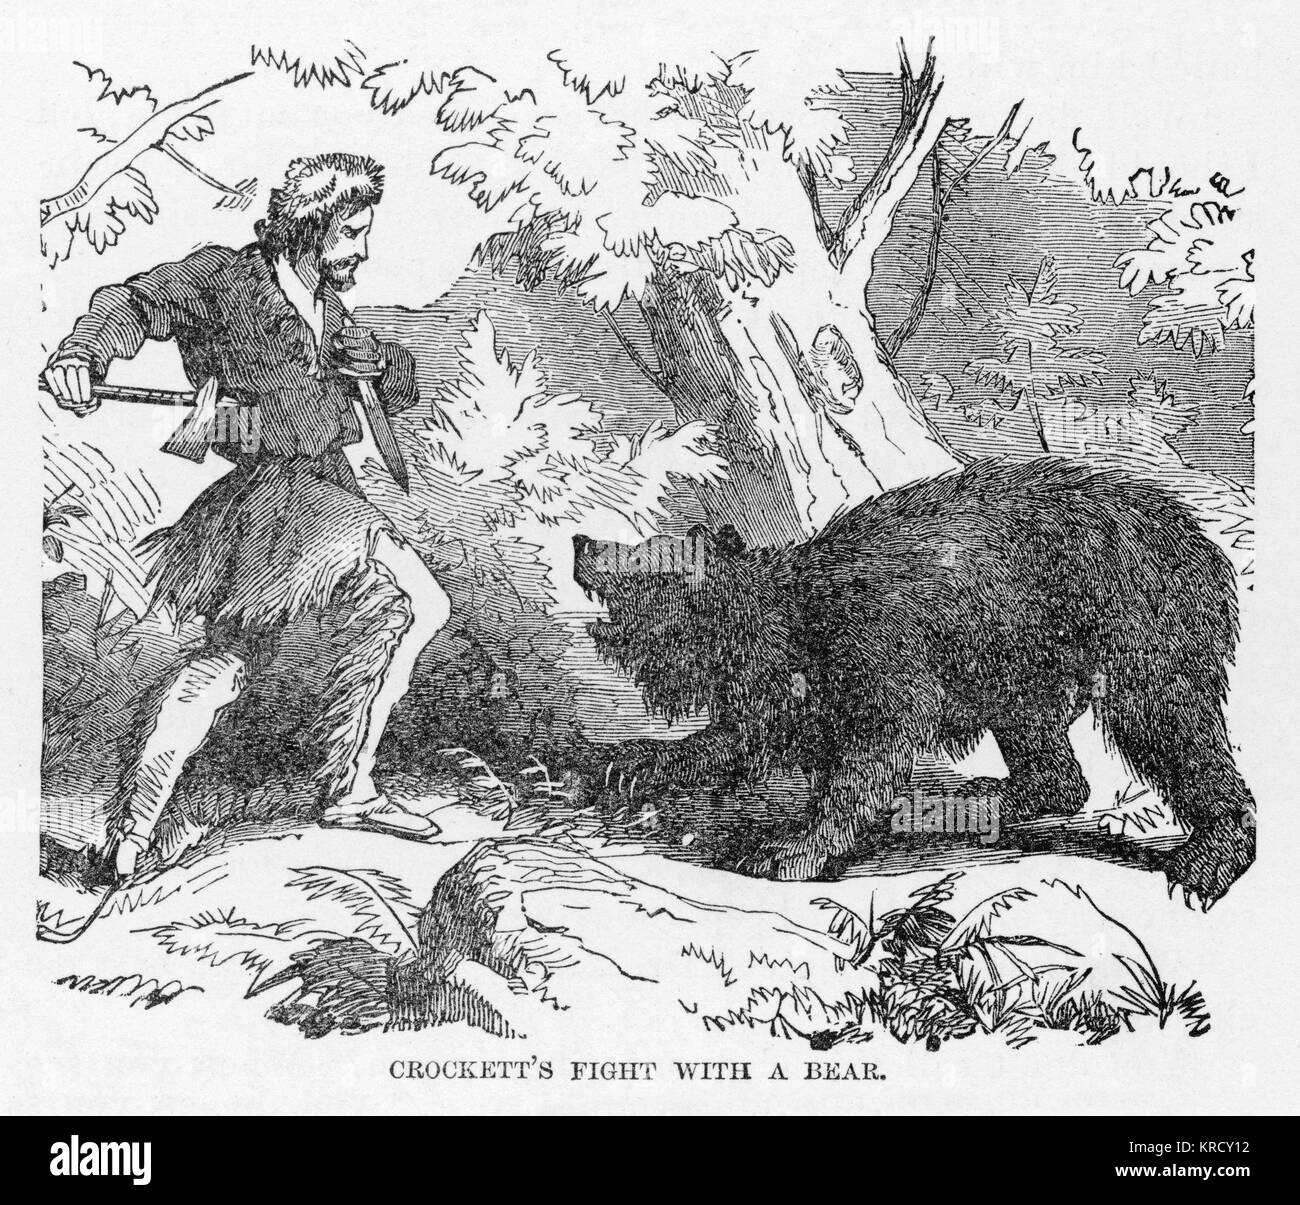 DAVY CROCKETT Armed with a knife and axe,  Davy Crockett fights a bear.   How the bear has annoyed him  isn't clear, though a new  jacket may be on the cards.     Date: 1786 - 1836 Stock Photo